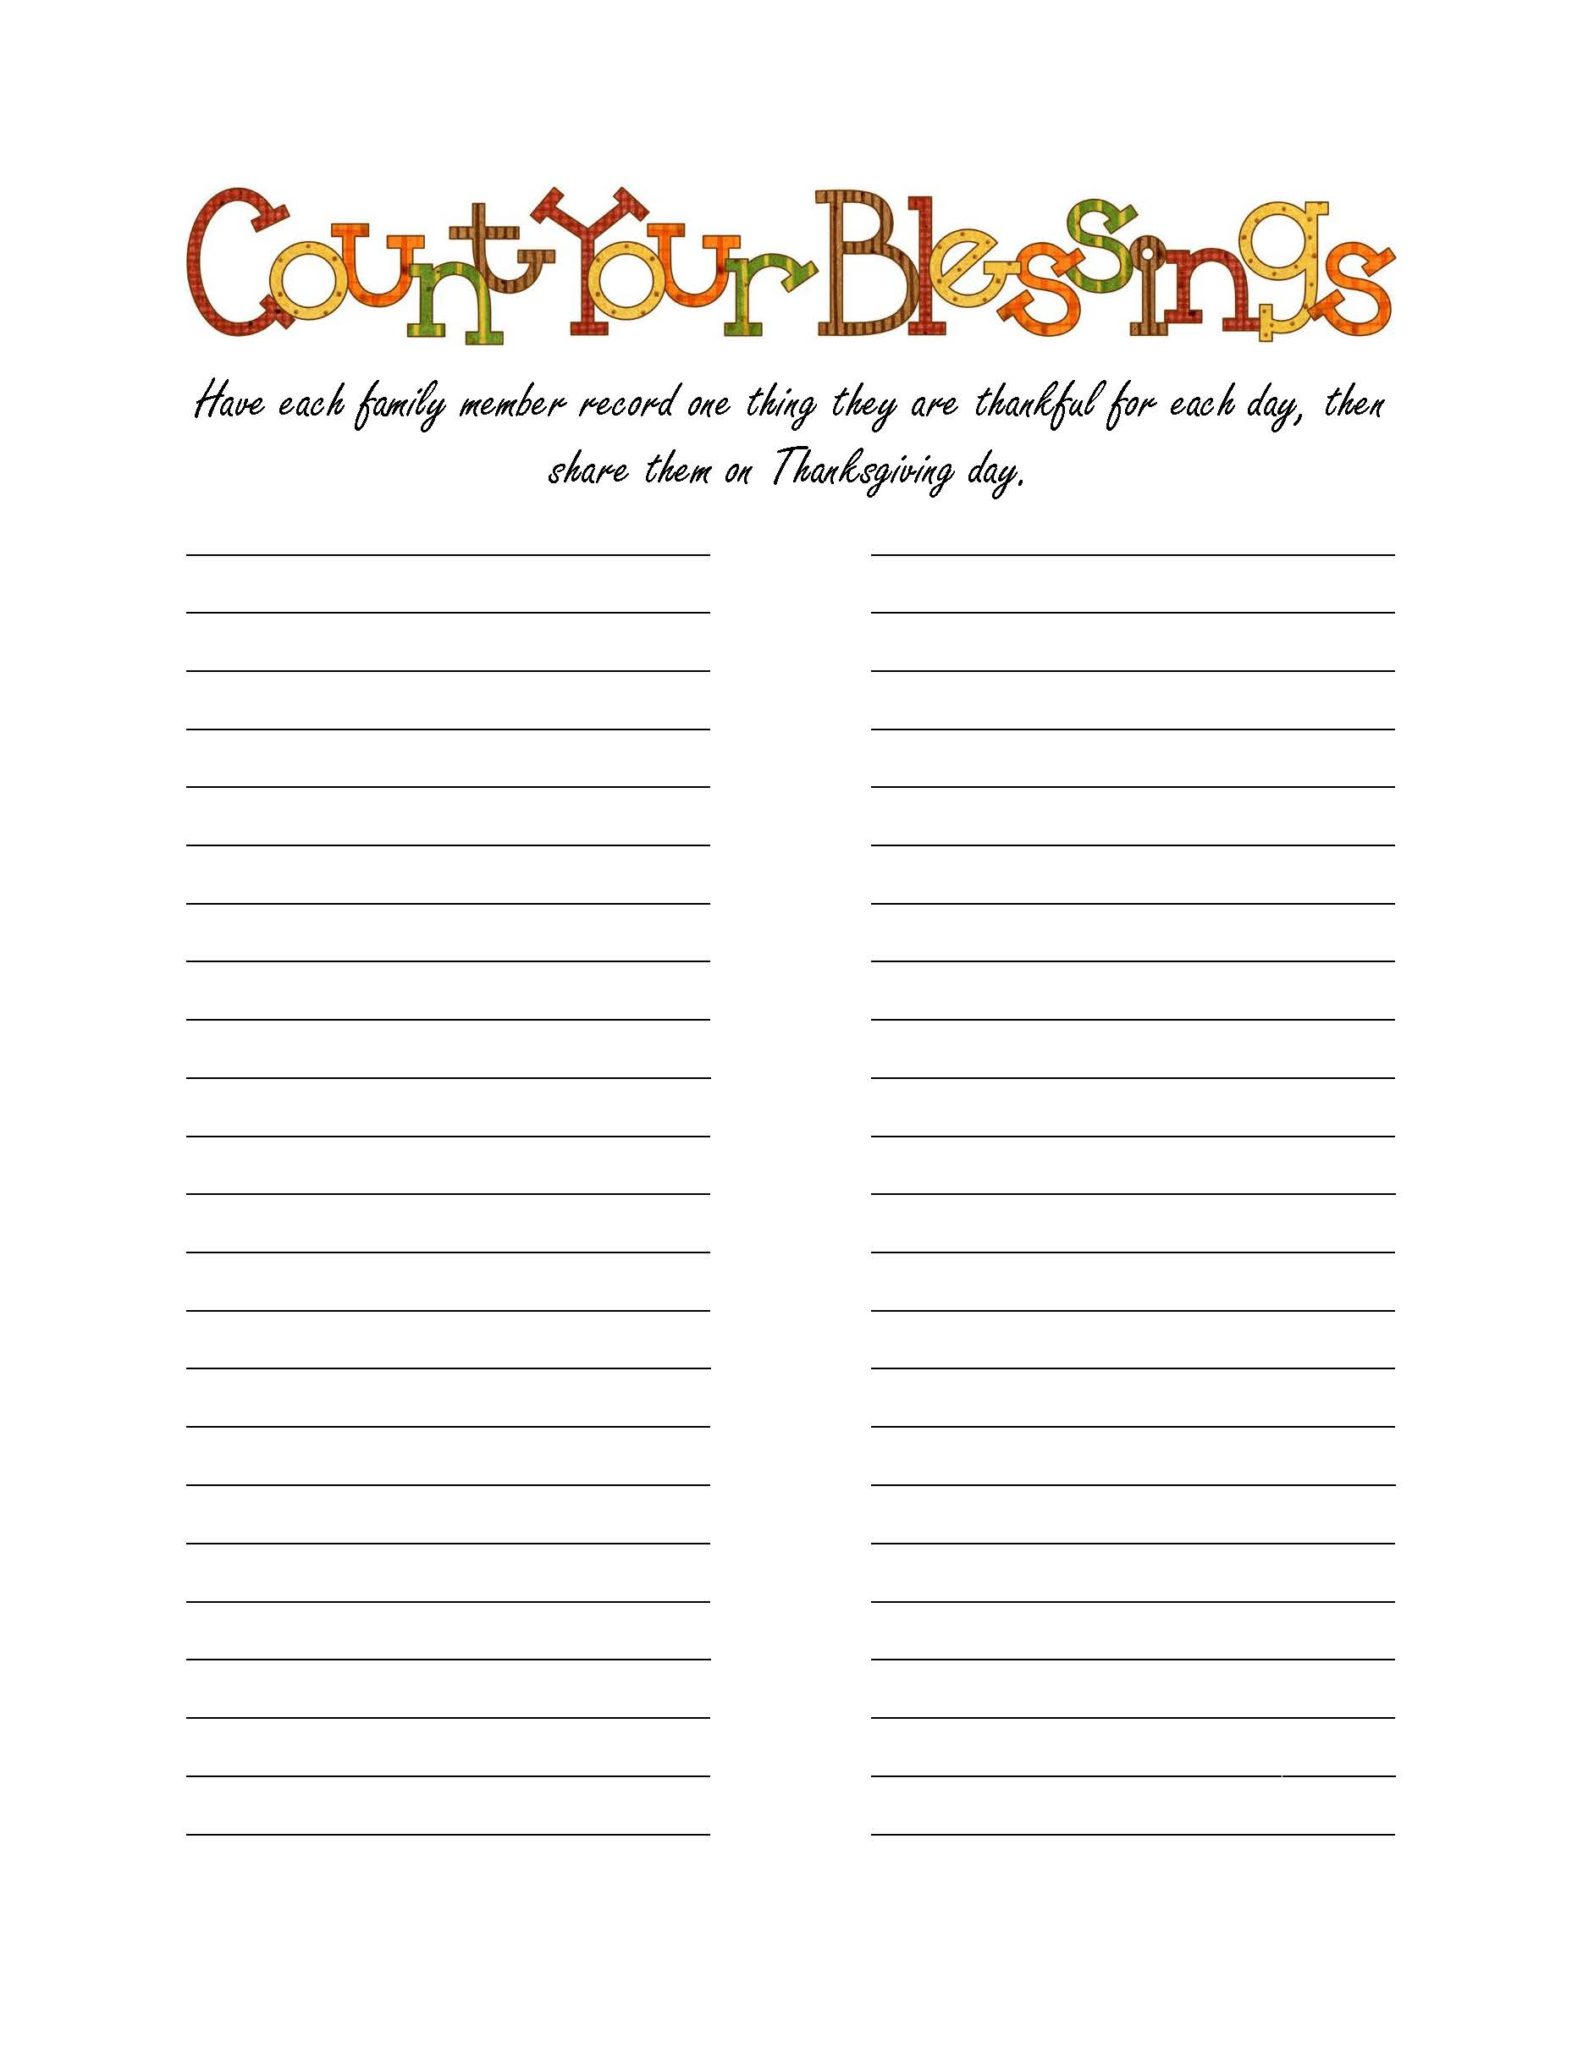 Count Your Blessings Free Printable California Unpublished